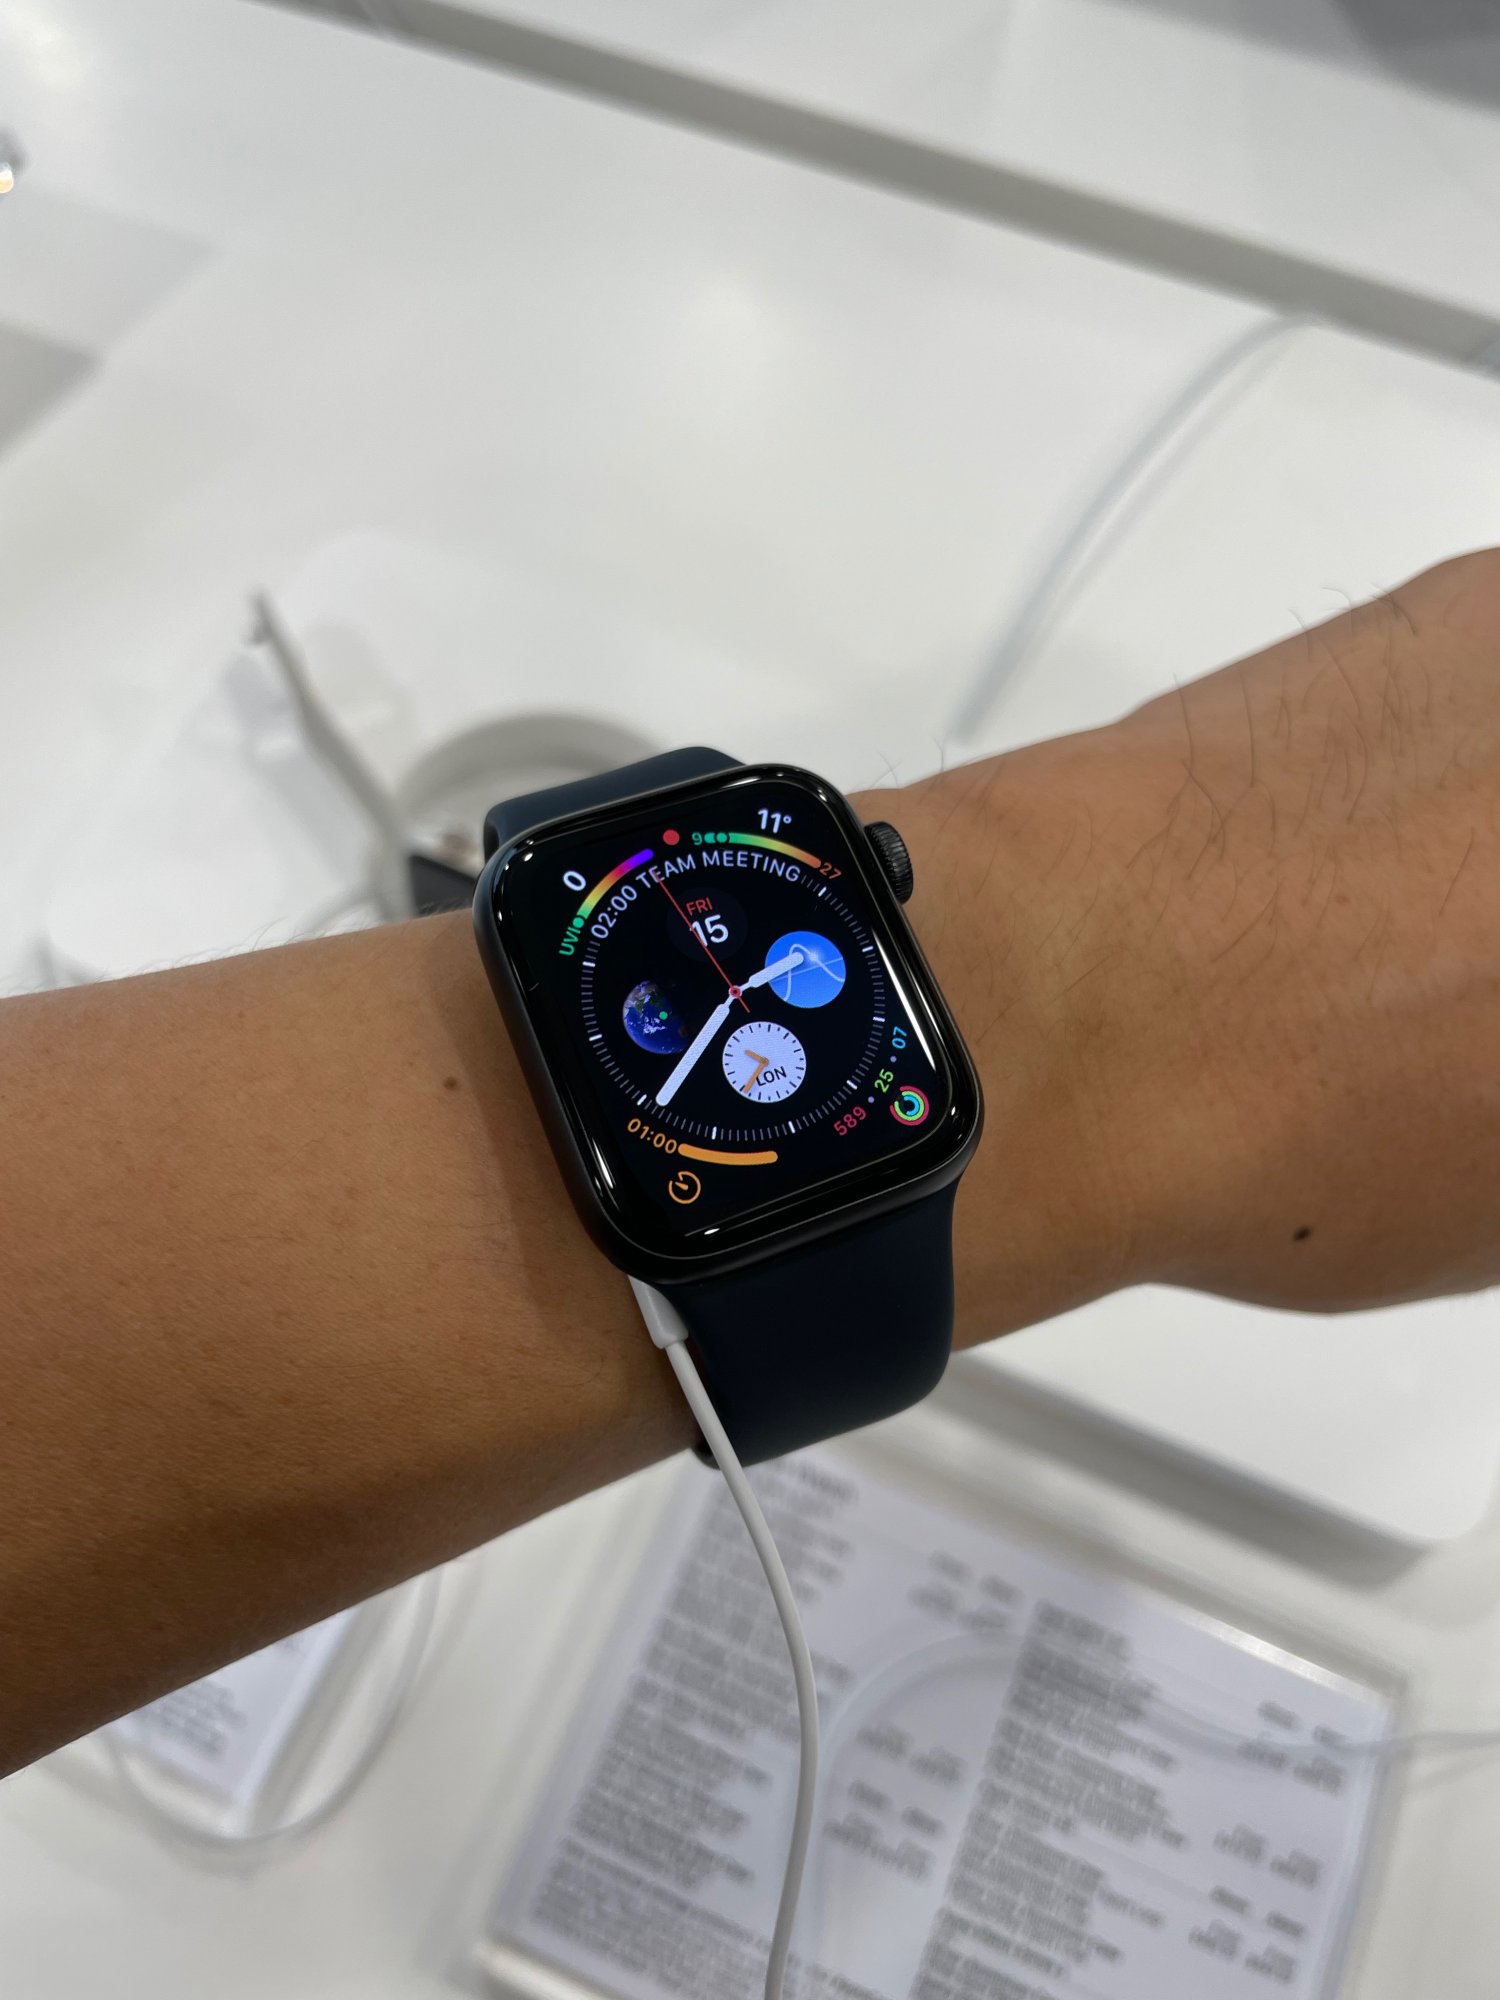 Modieus rietje sneeuwman I tried the S7 watches in person today & I am worried... | MacRumors Forums